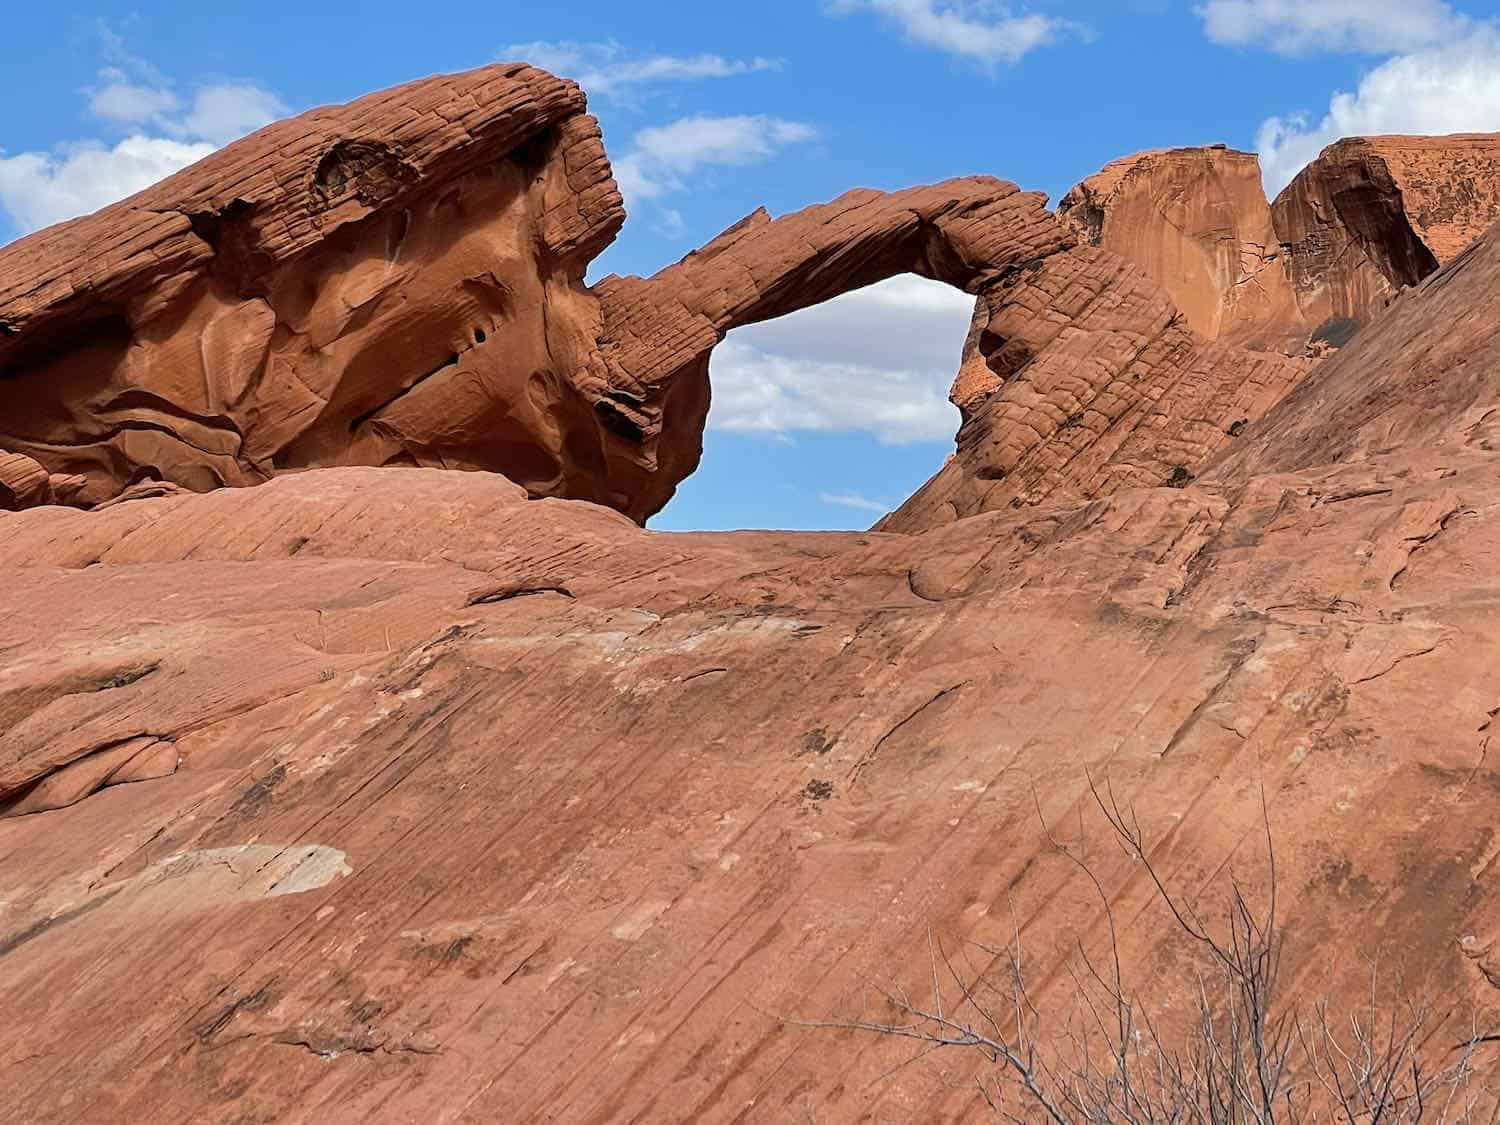 An arch in red rocks known as Arch Rock in Valley of Fire State Park Nevada.